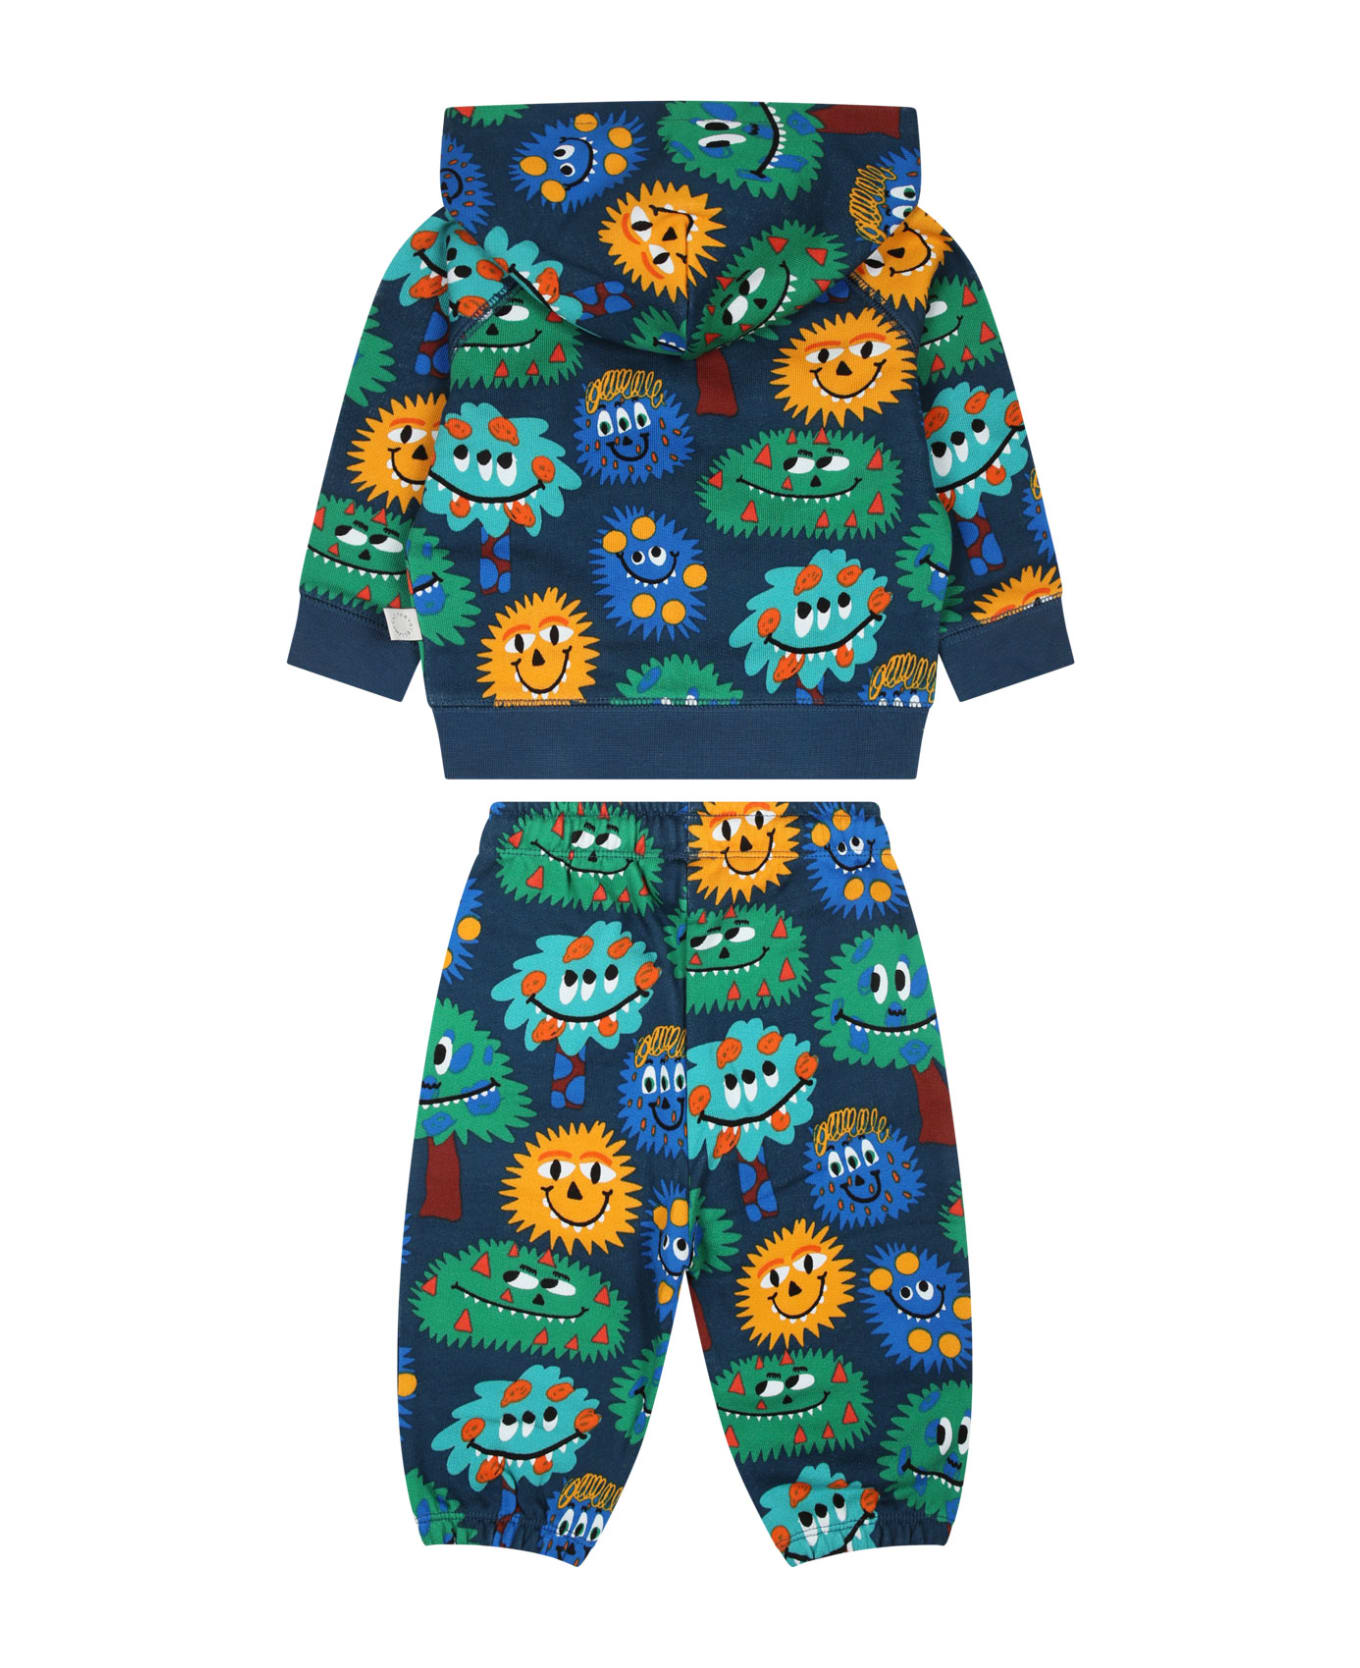 Stella McCartney Kids Multicolor Set For Baby Boy With All-over Print - Multicolor ボトムス